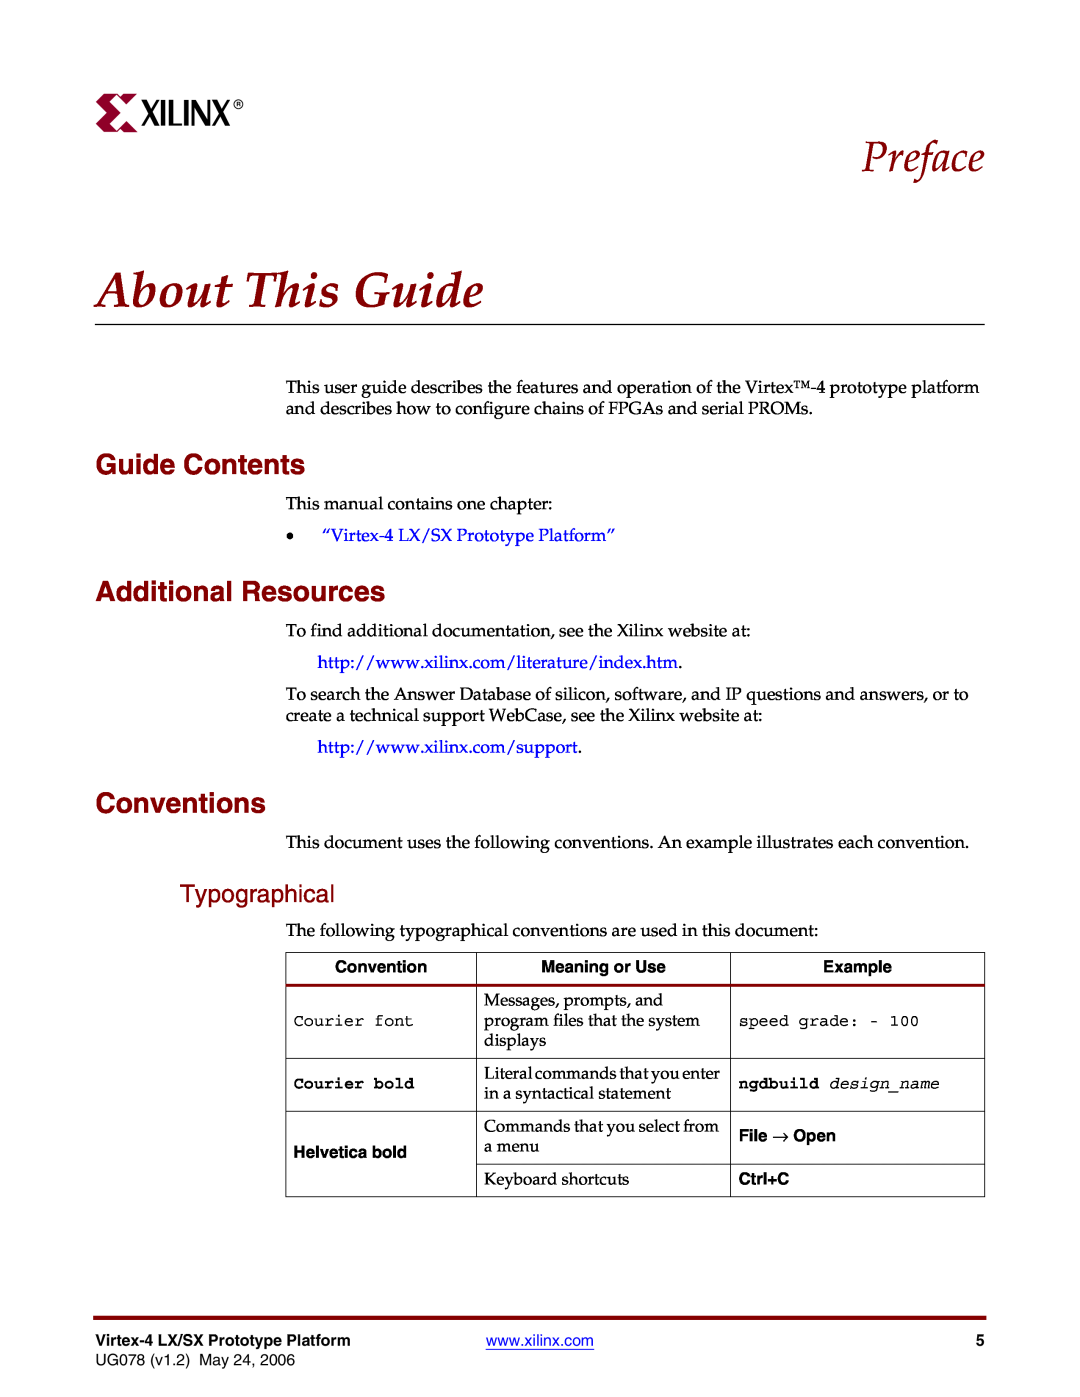 Xilinx UG078 About This Guide, Guide Contents, Additional Resources, Conventions, Typographical, Meaning or Use, Example 